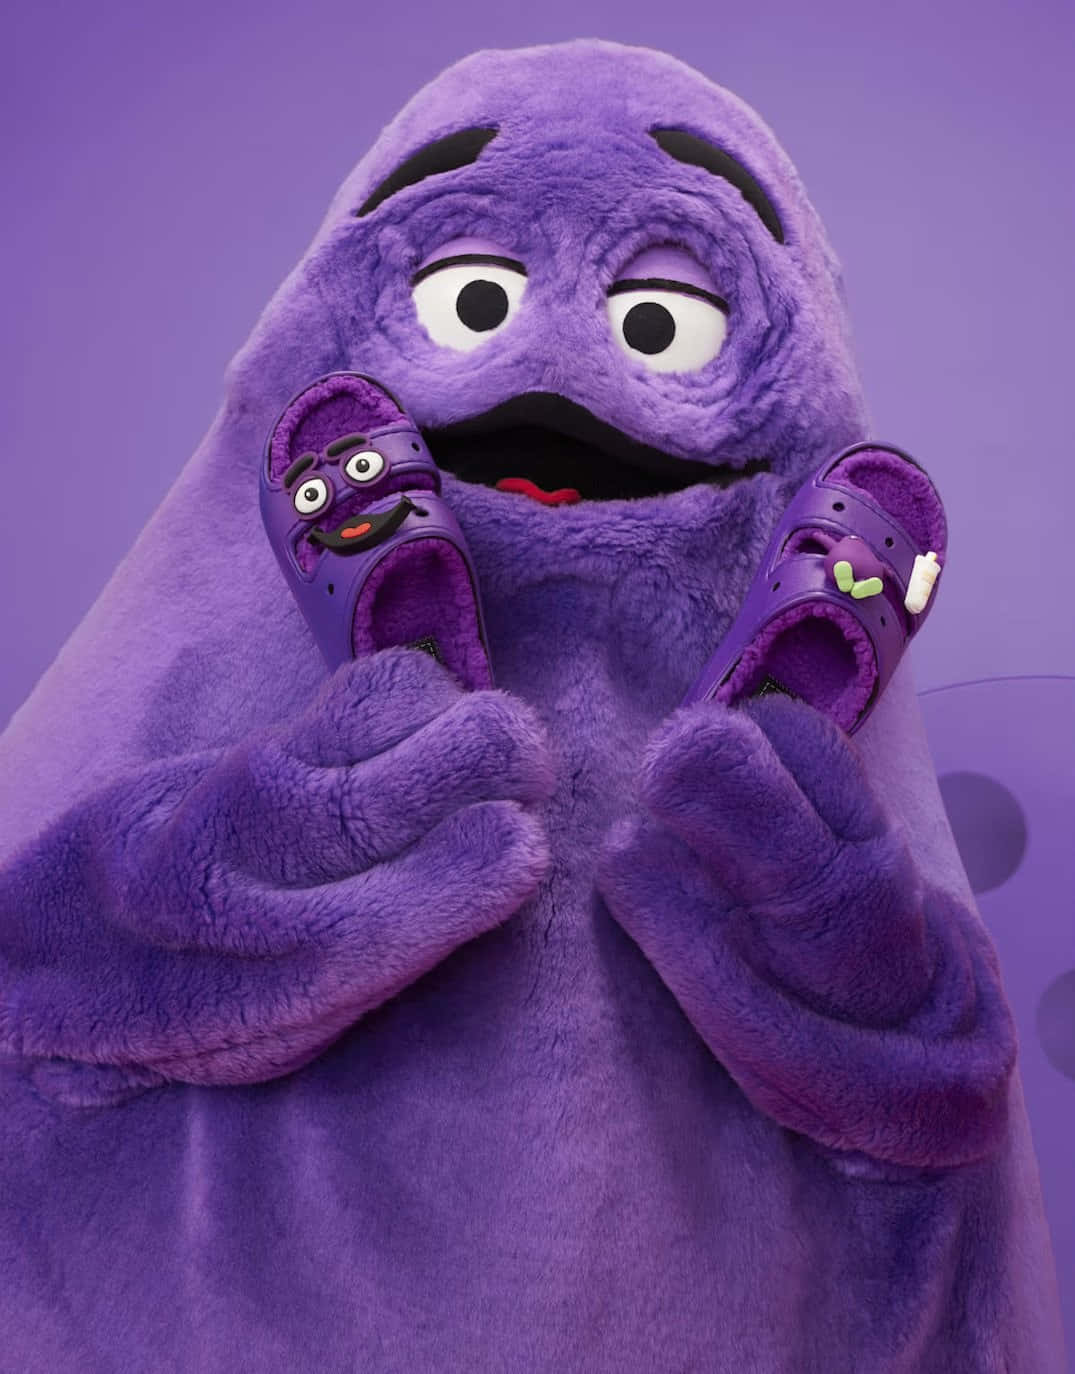 Purple_ Character_ Grimacing_with_ Slippers.jpg Background